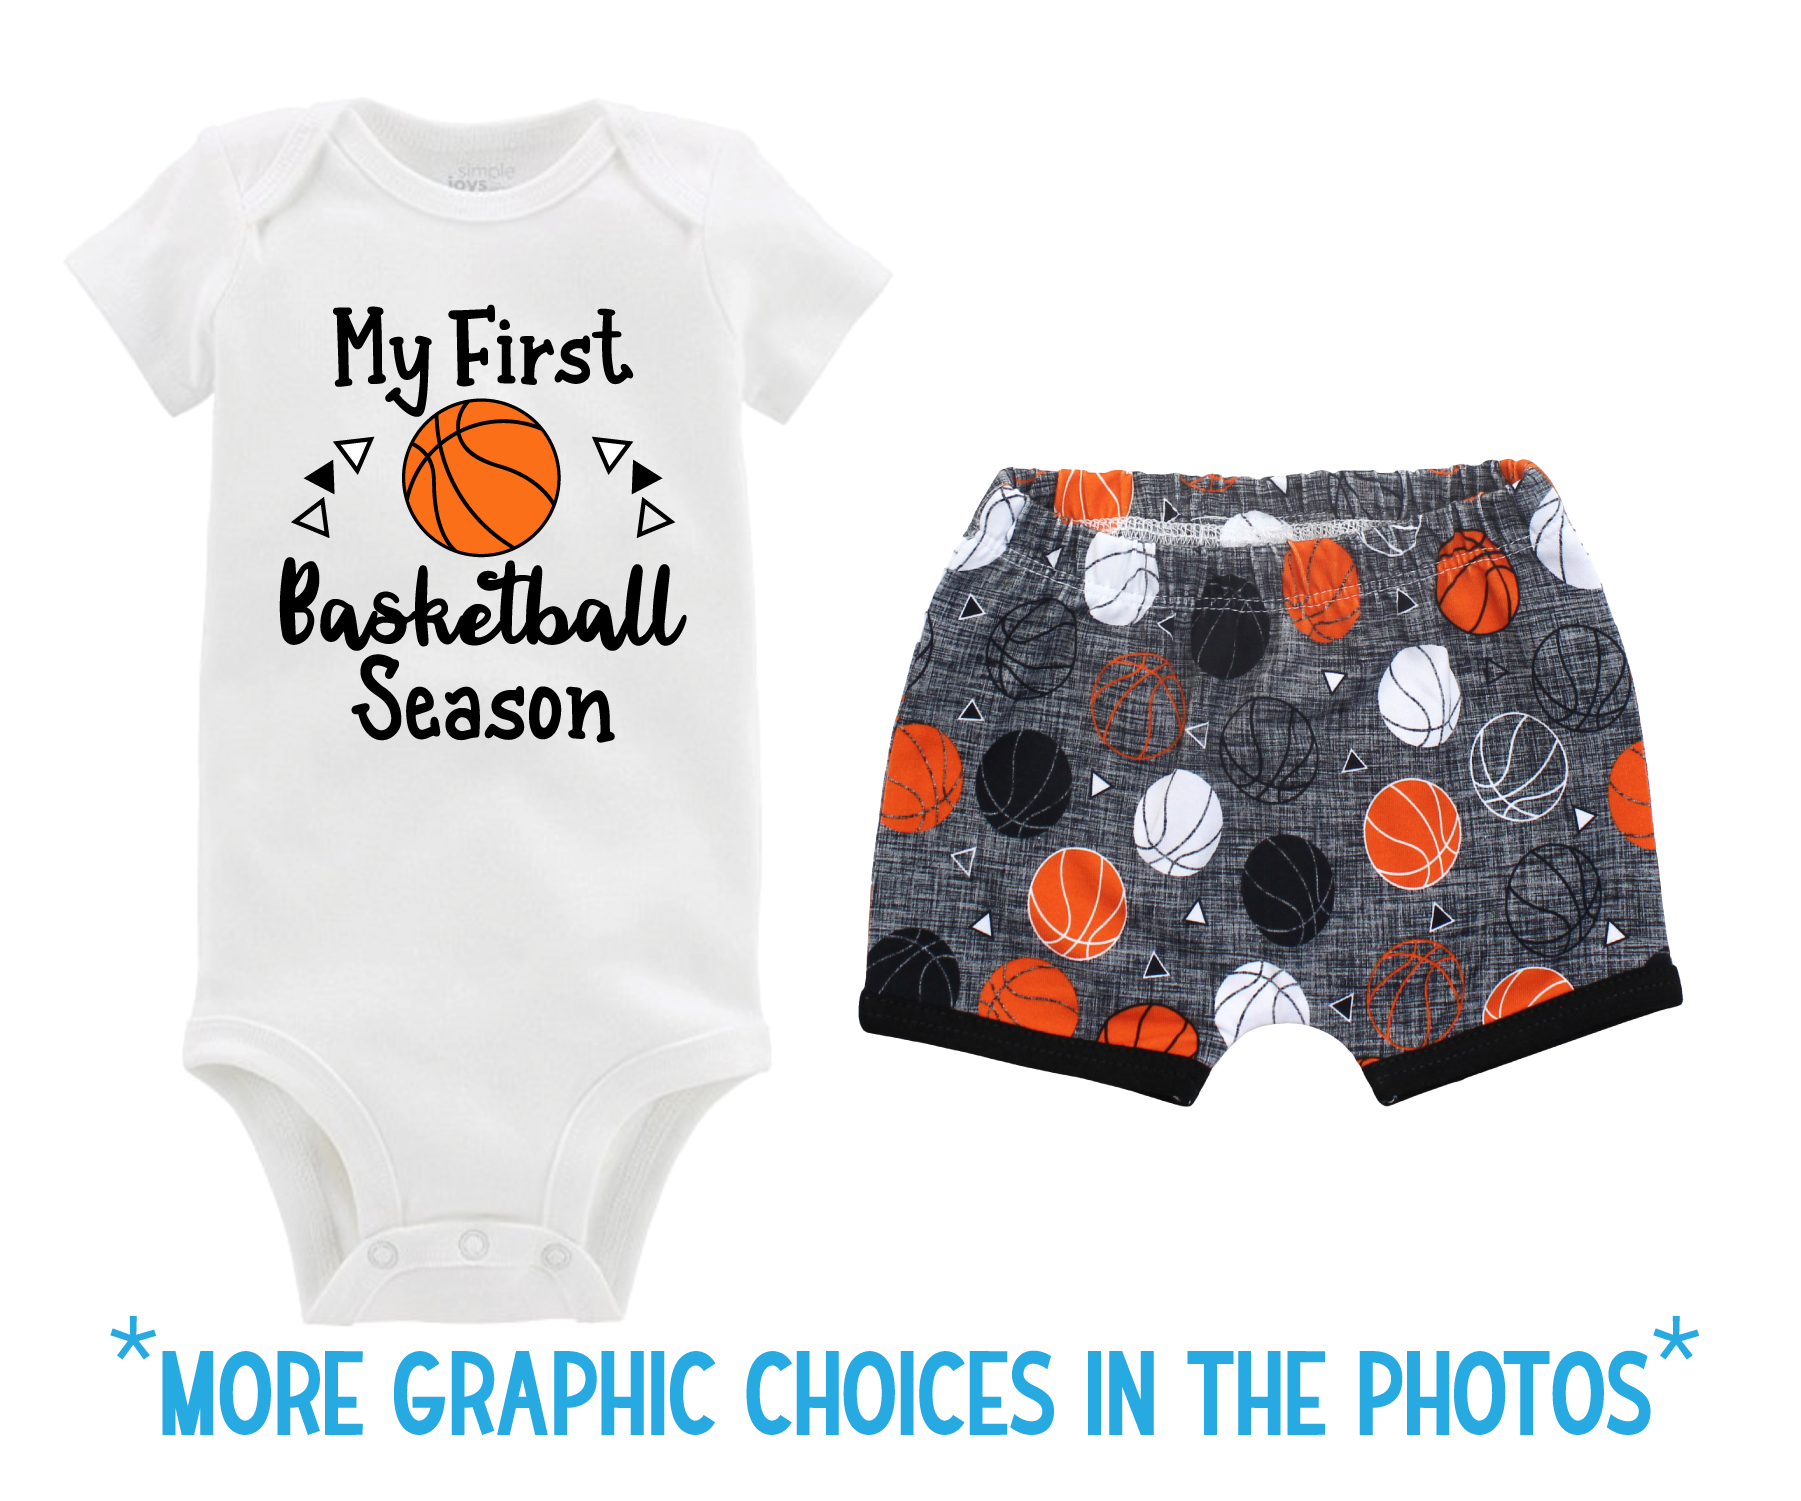 Unisex Basketball Short Outfit